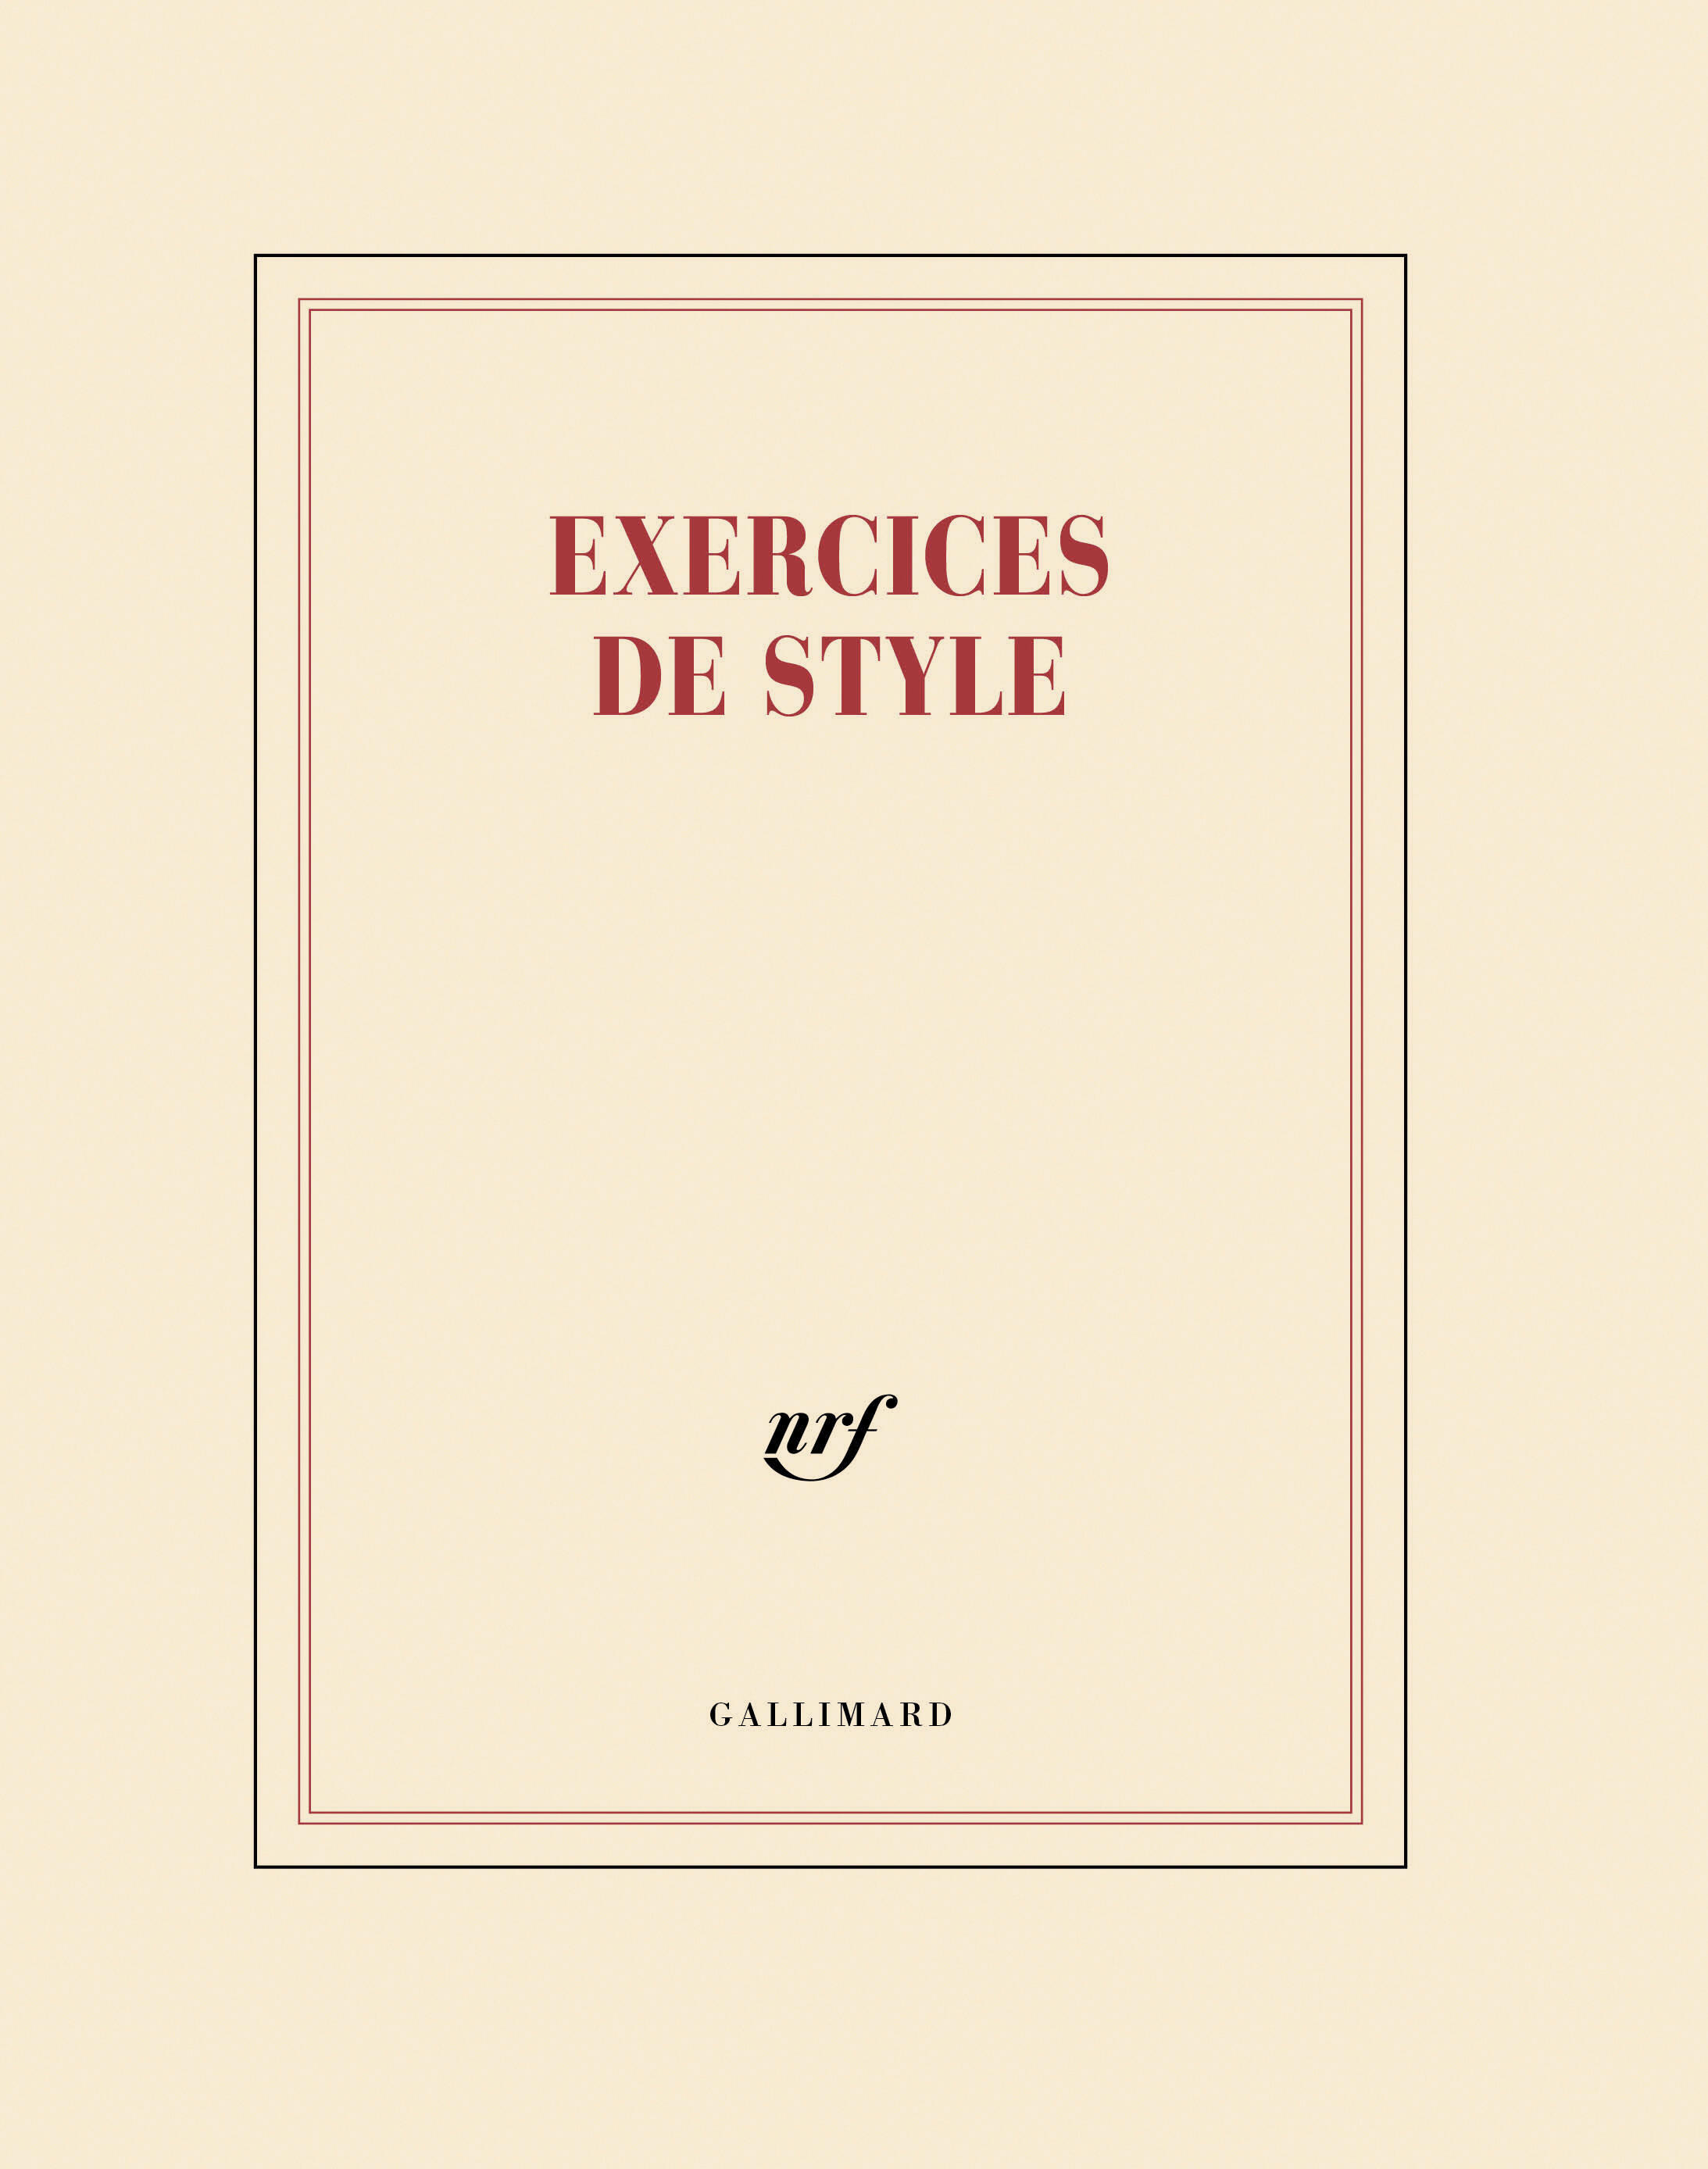 CAHIER "EXERCICES DE STYLE" (PAPETERIE)